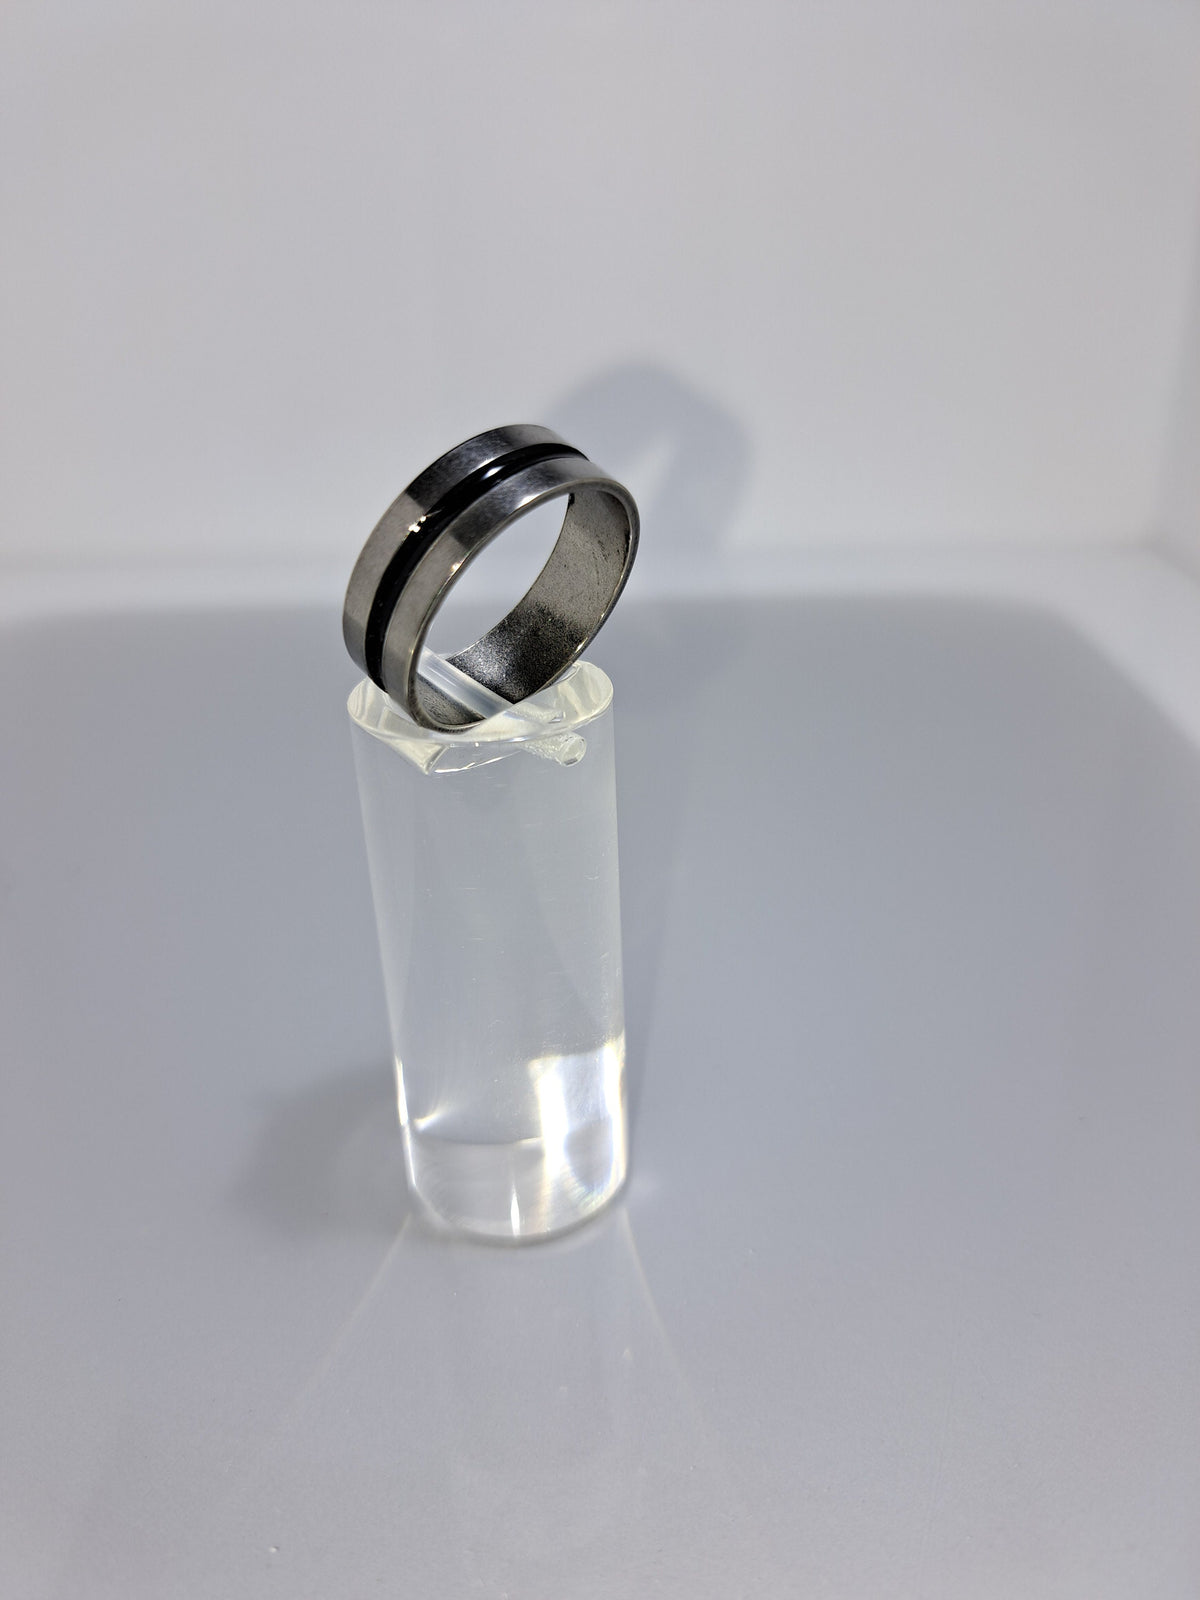 Silver stainless steel unisex ring with a black rounded channel around the band. Perfect costume jewellery.